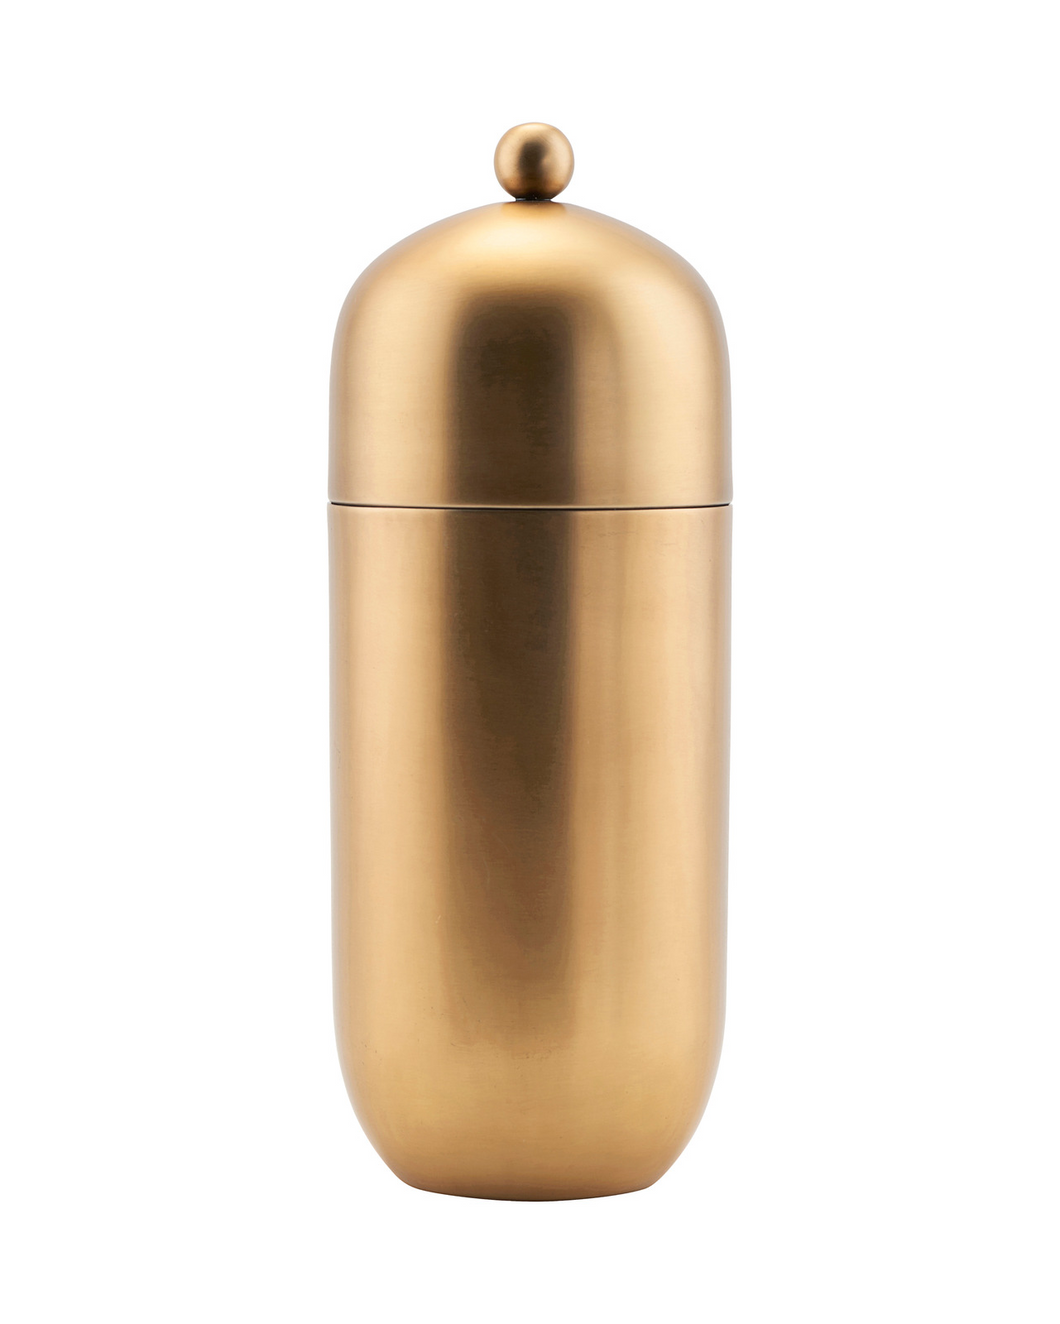 Brass finished cocktail shaker